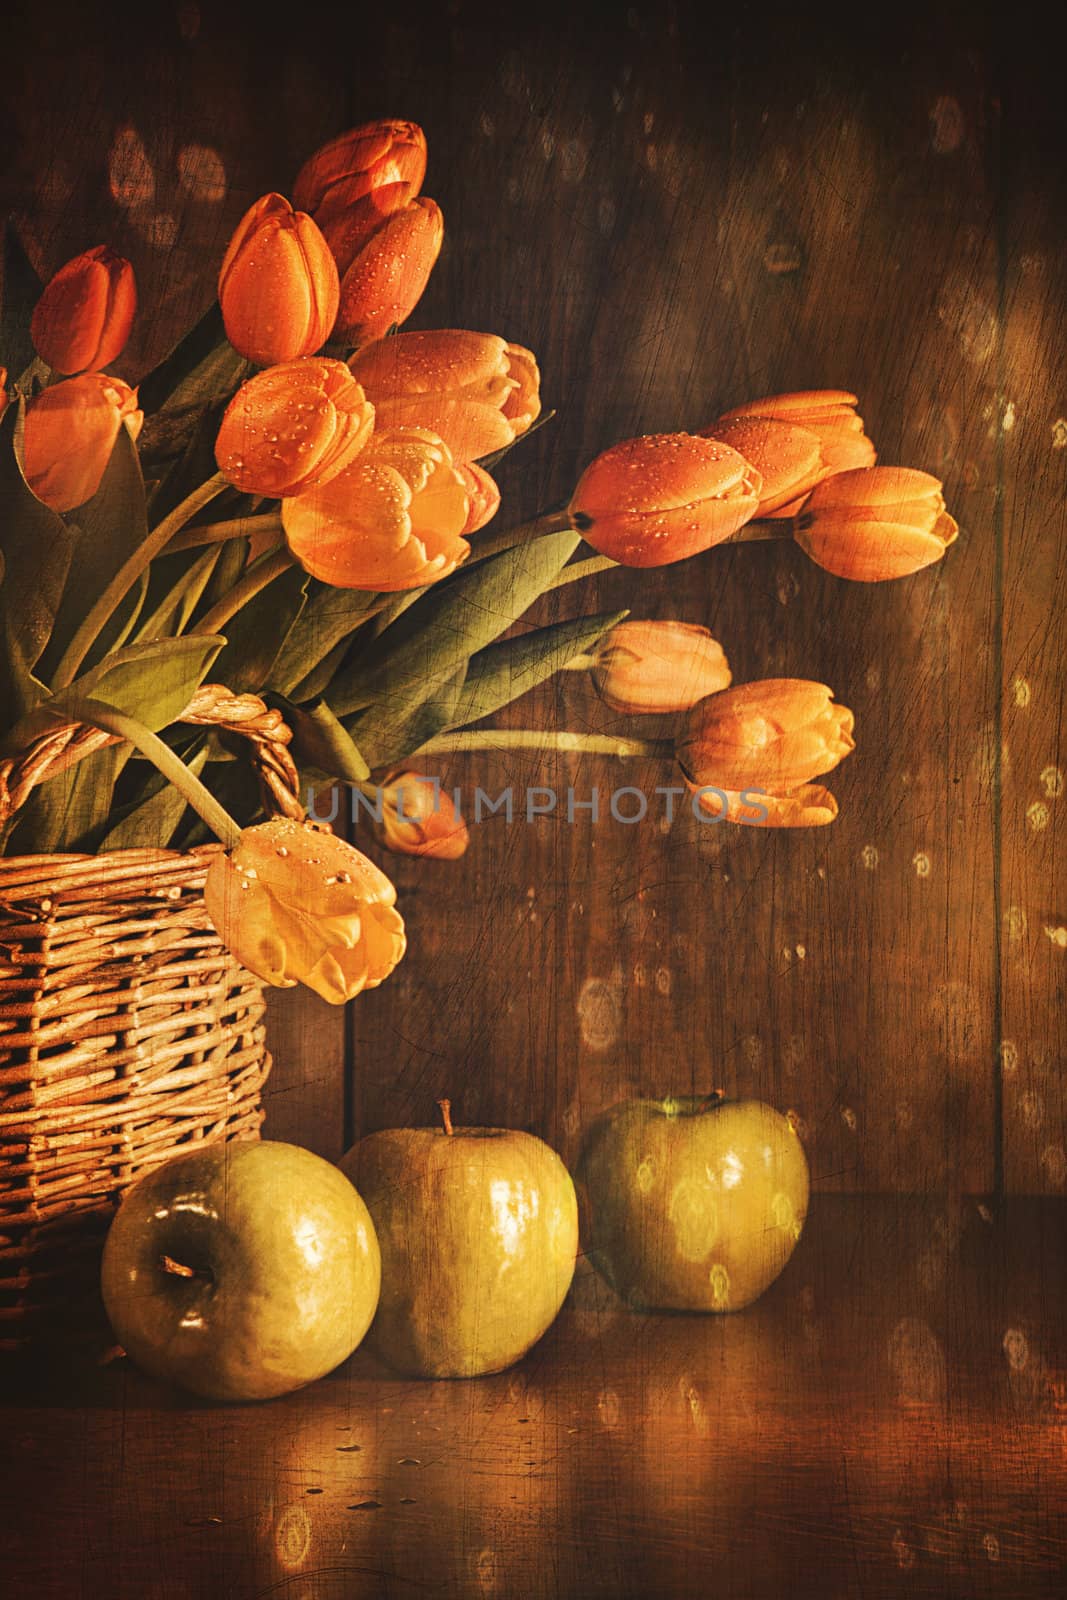 Spring tulips and with old vintage feeling